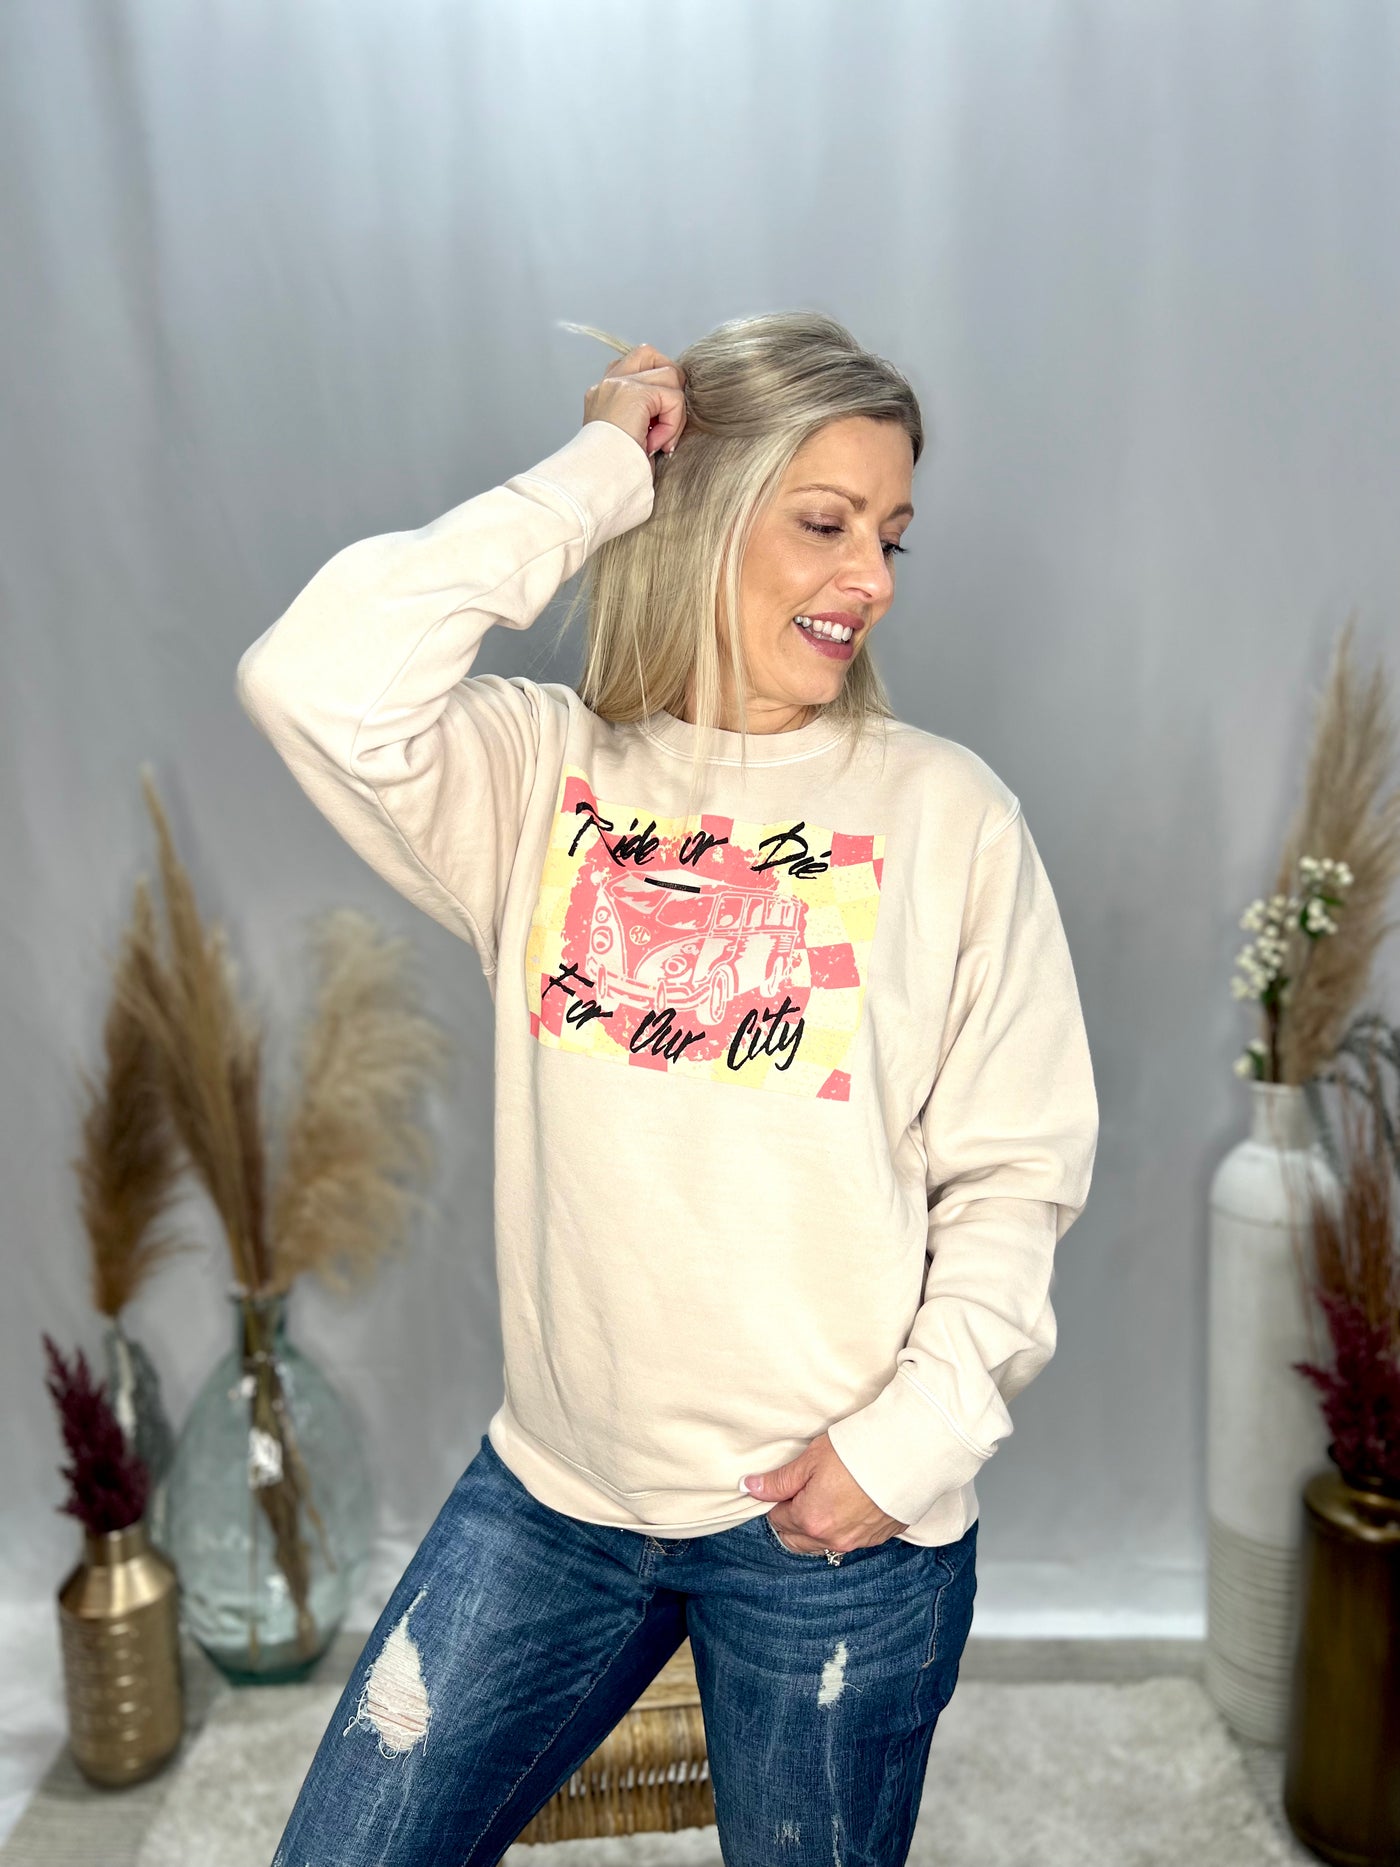 We Ride or Die for Our City Retro Van Graphic Sweatshirt, Pigment Ivory